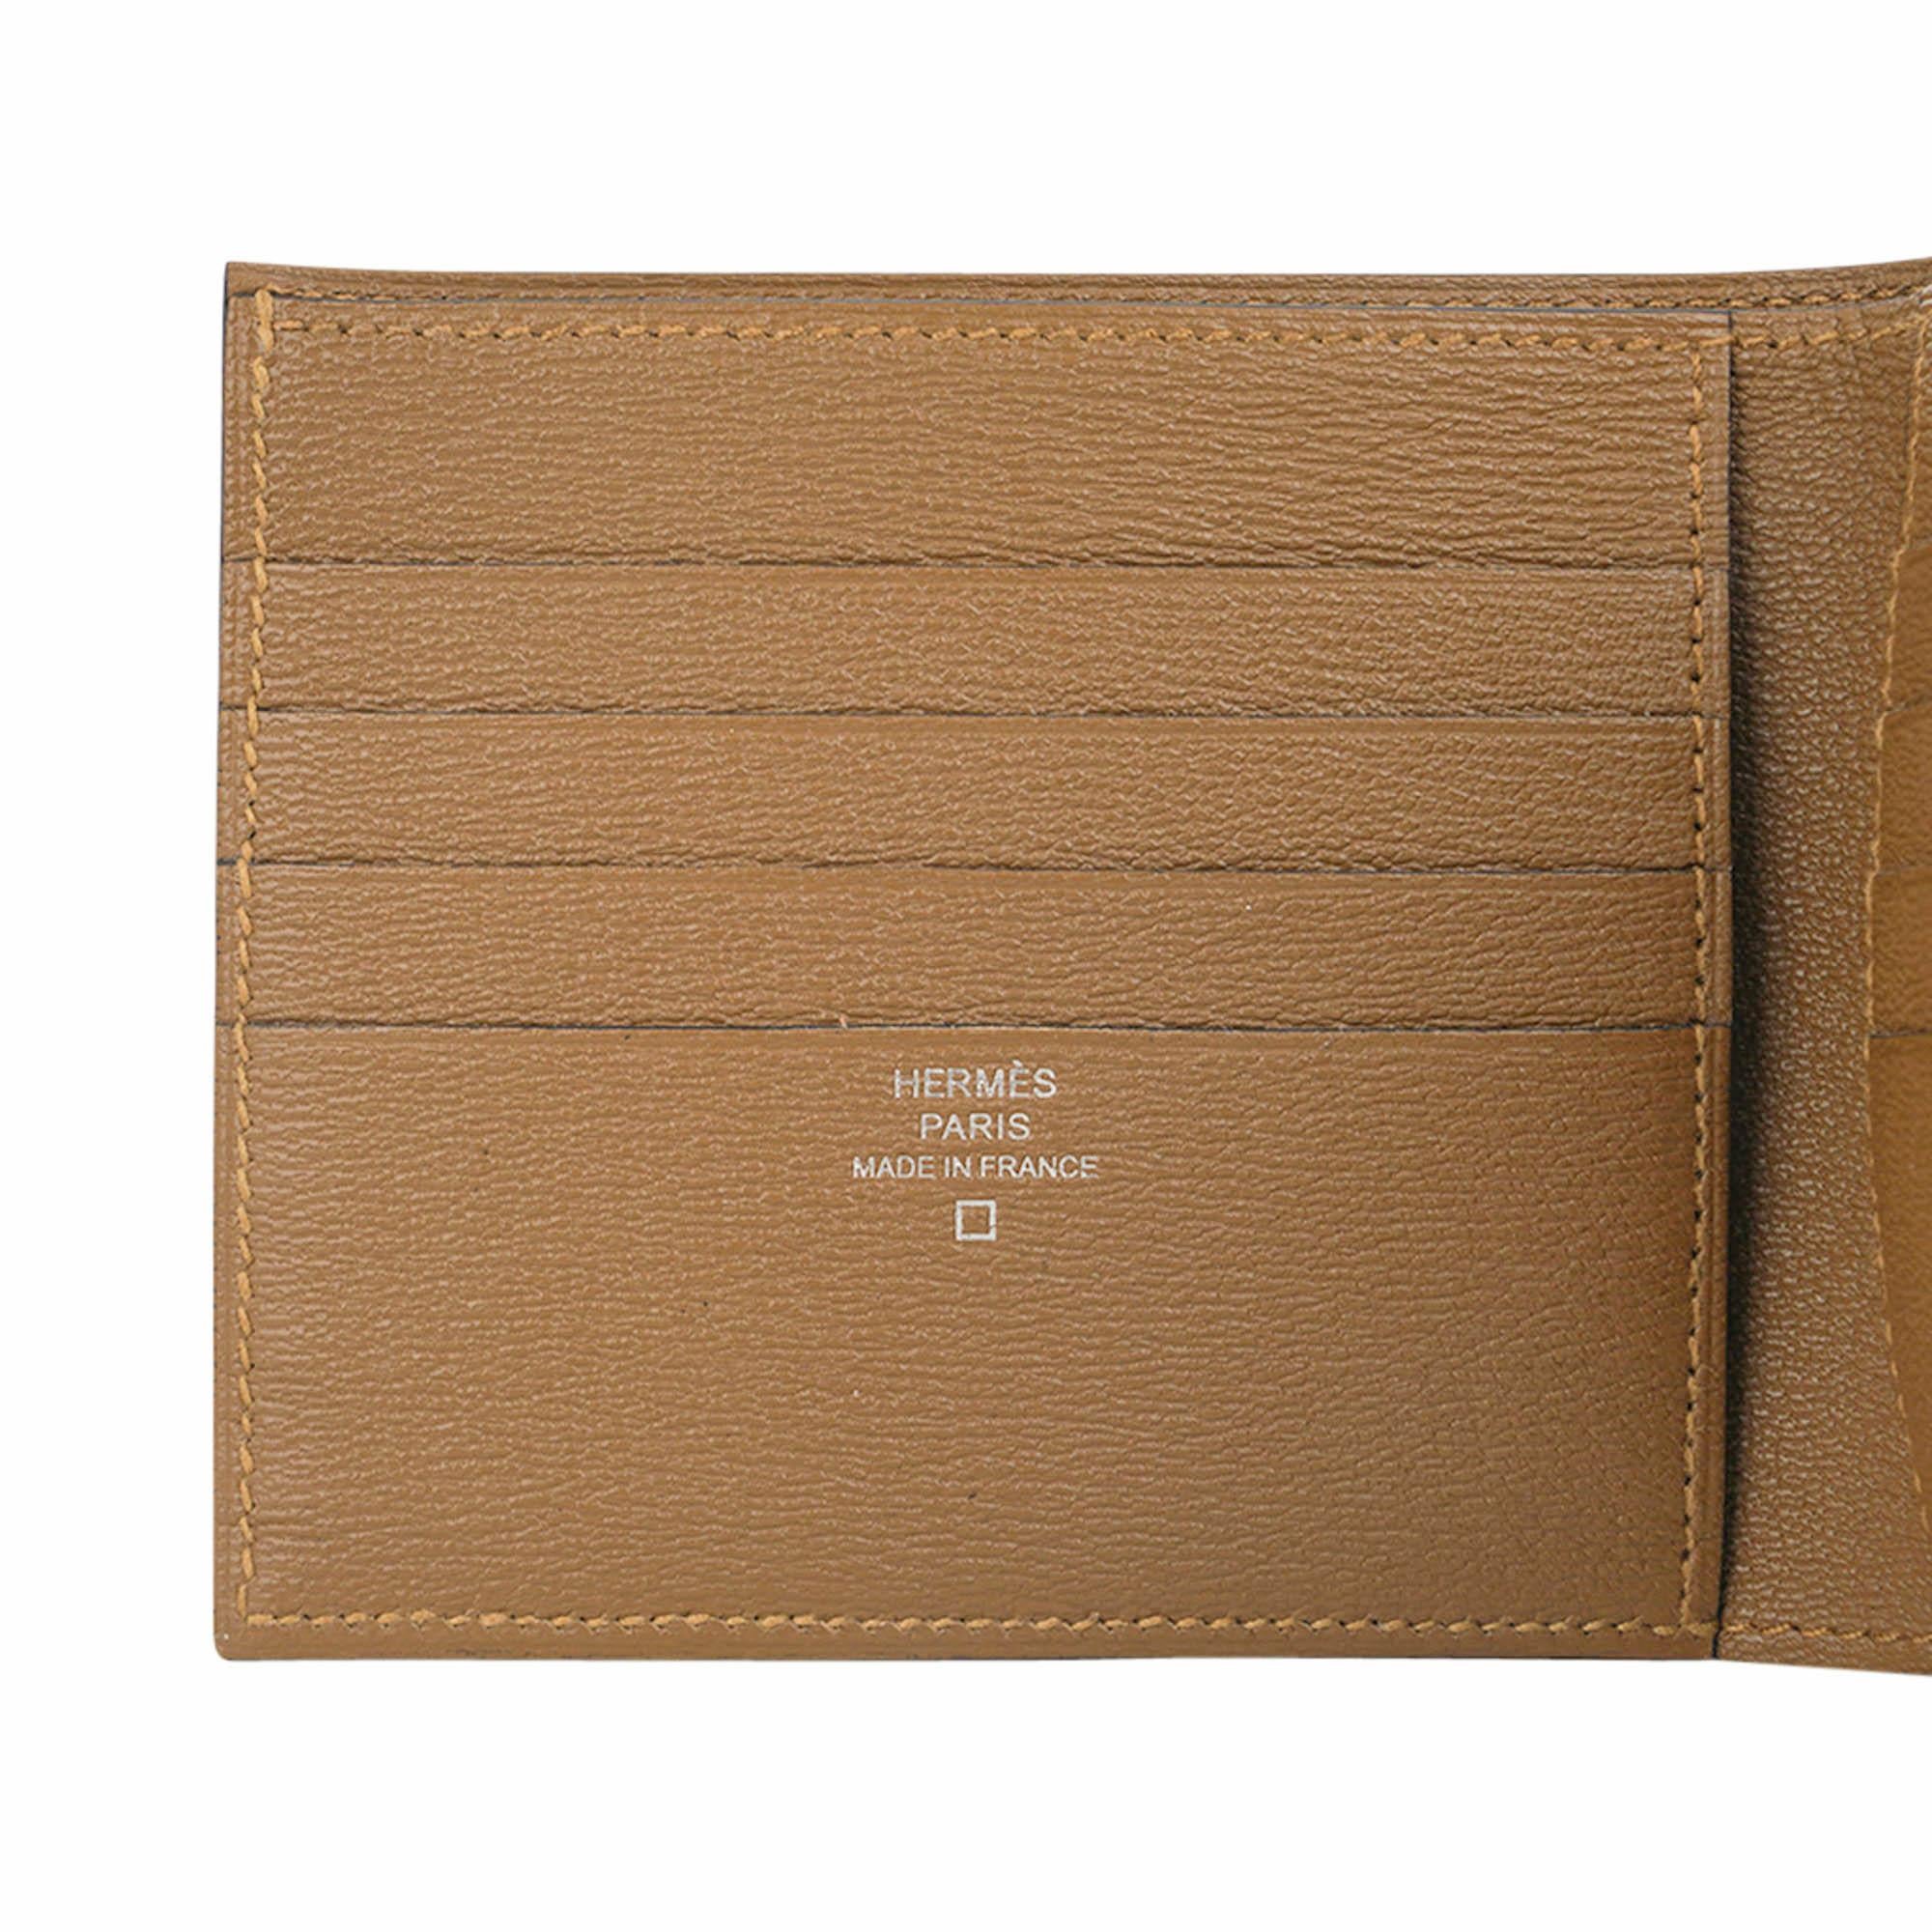 Mightychic offers an Hermes Men's MC2 Copernic compact bi-fold wallet featured in matte Kraft Alligator.
This warm muted peanut butter colour is a perfect neutral men's wallet which is rare to find, and is arguably one of the best wallets with clean